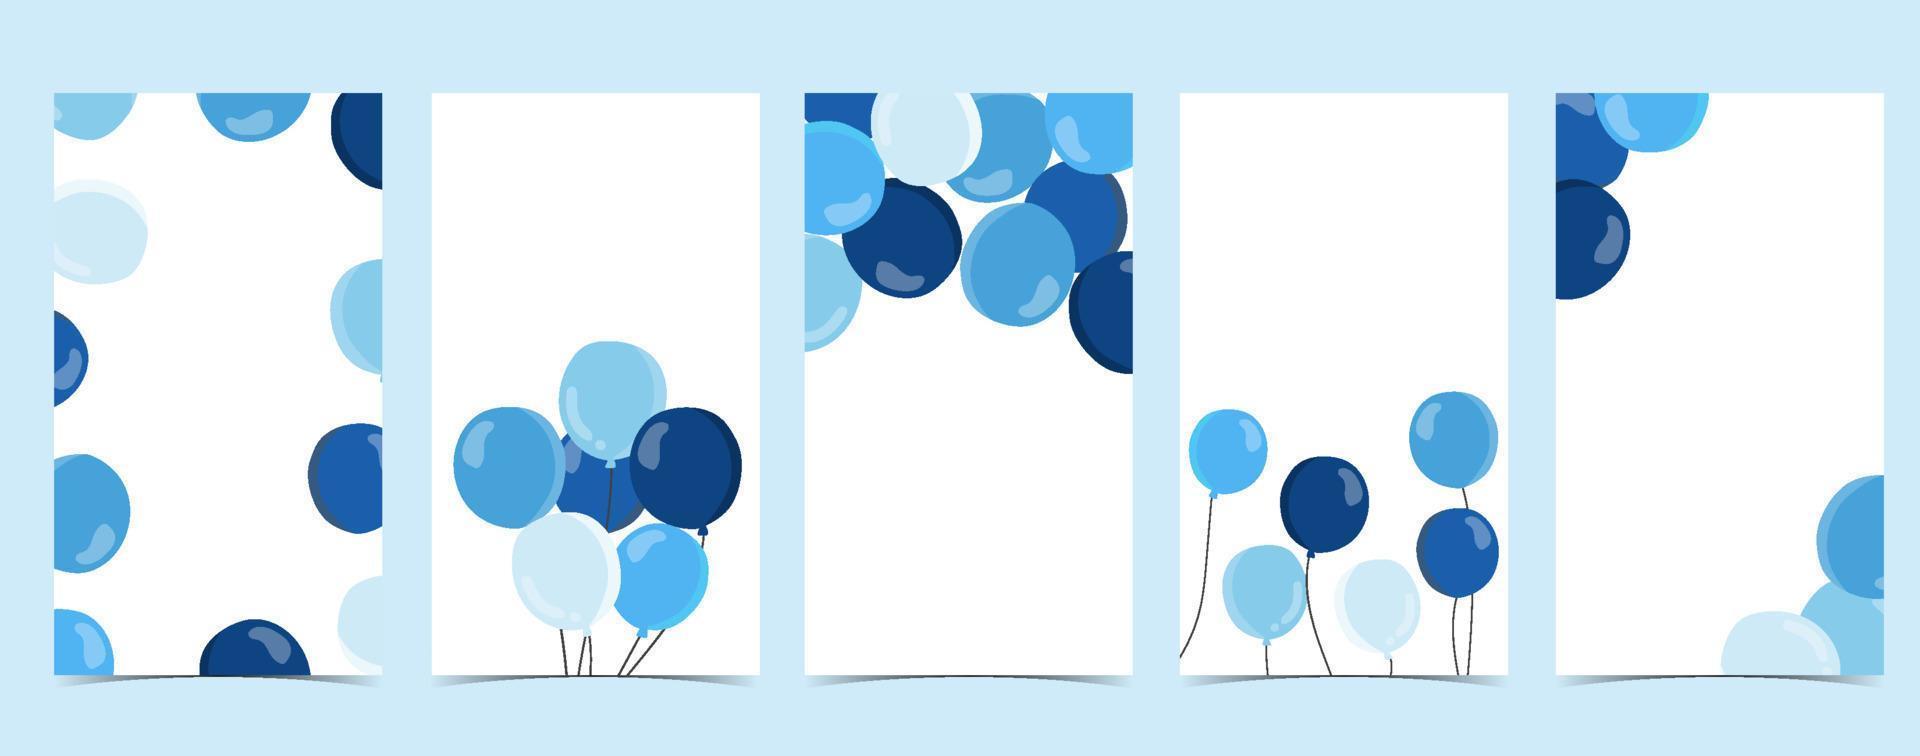 blue balloon on white background for party social media vector